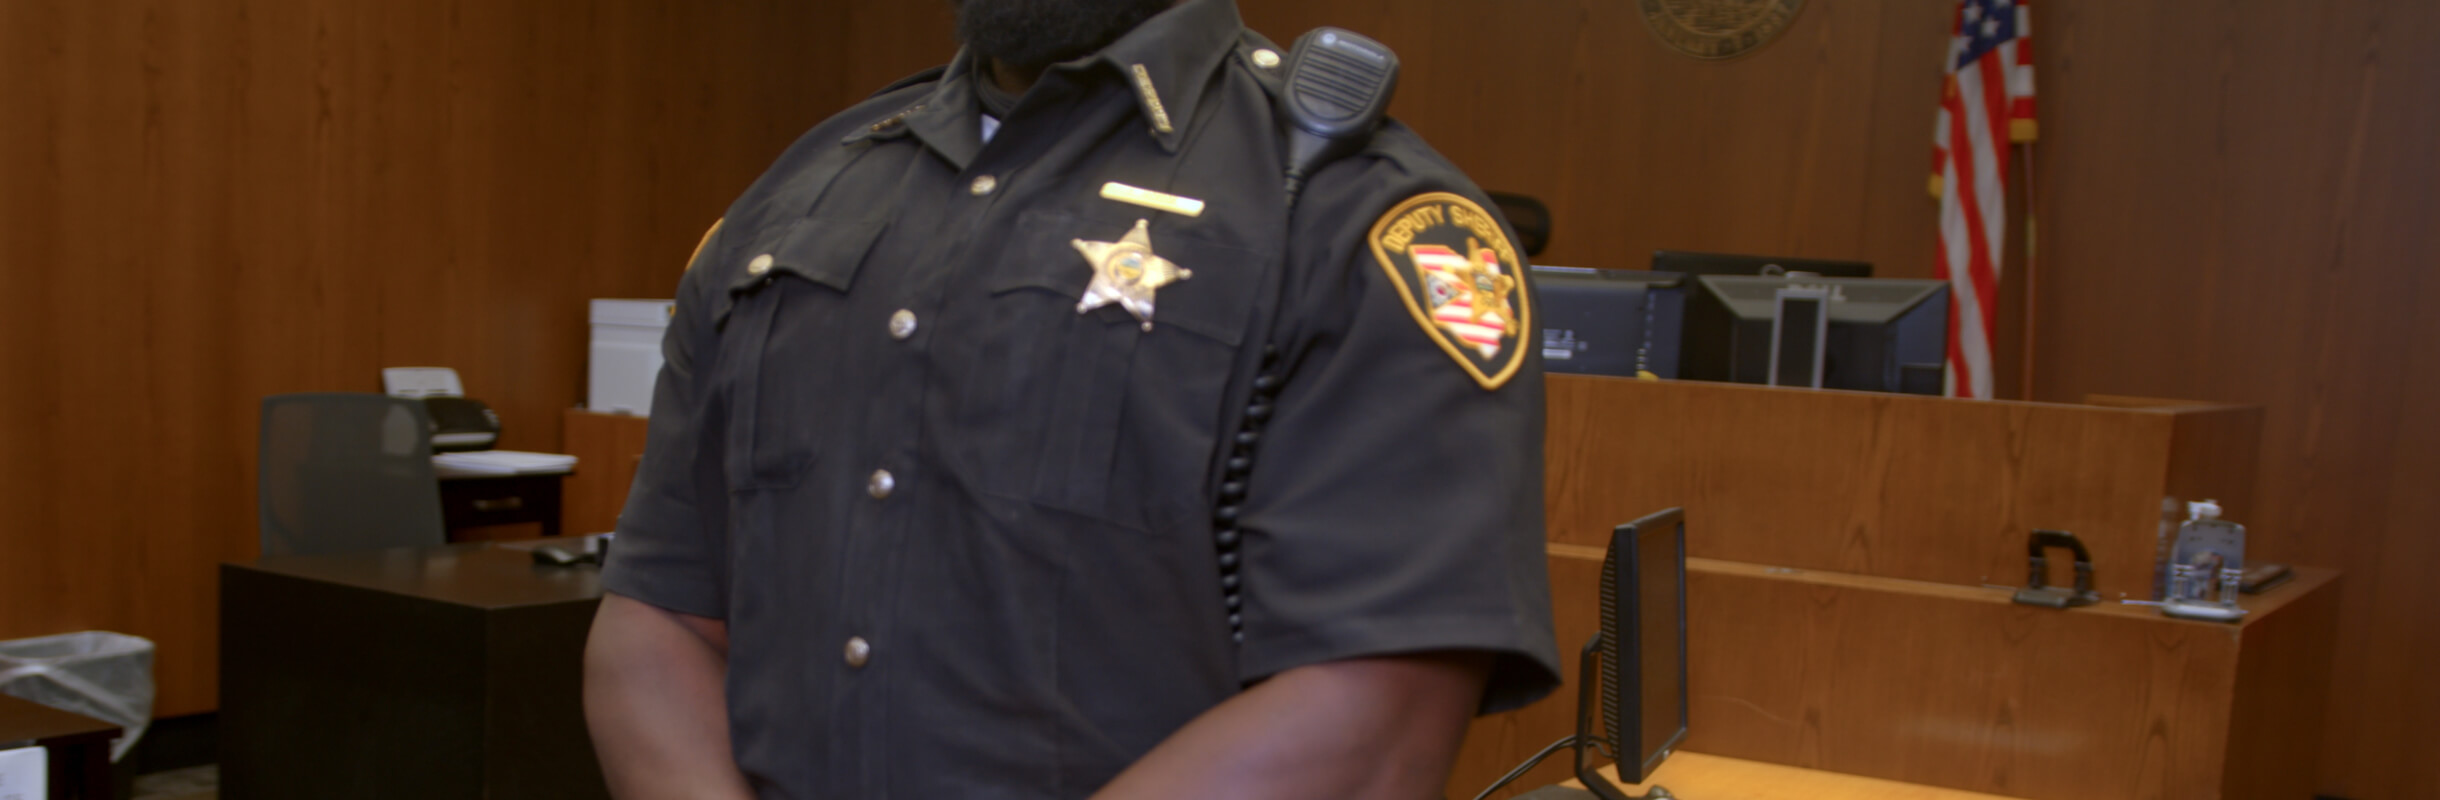 Officer in Uniform in Courtroom